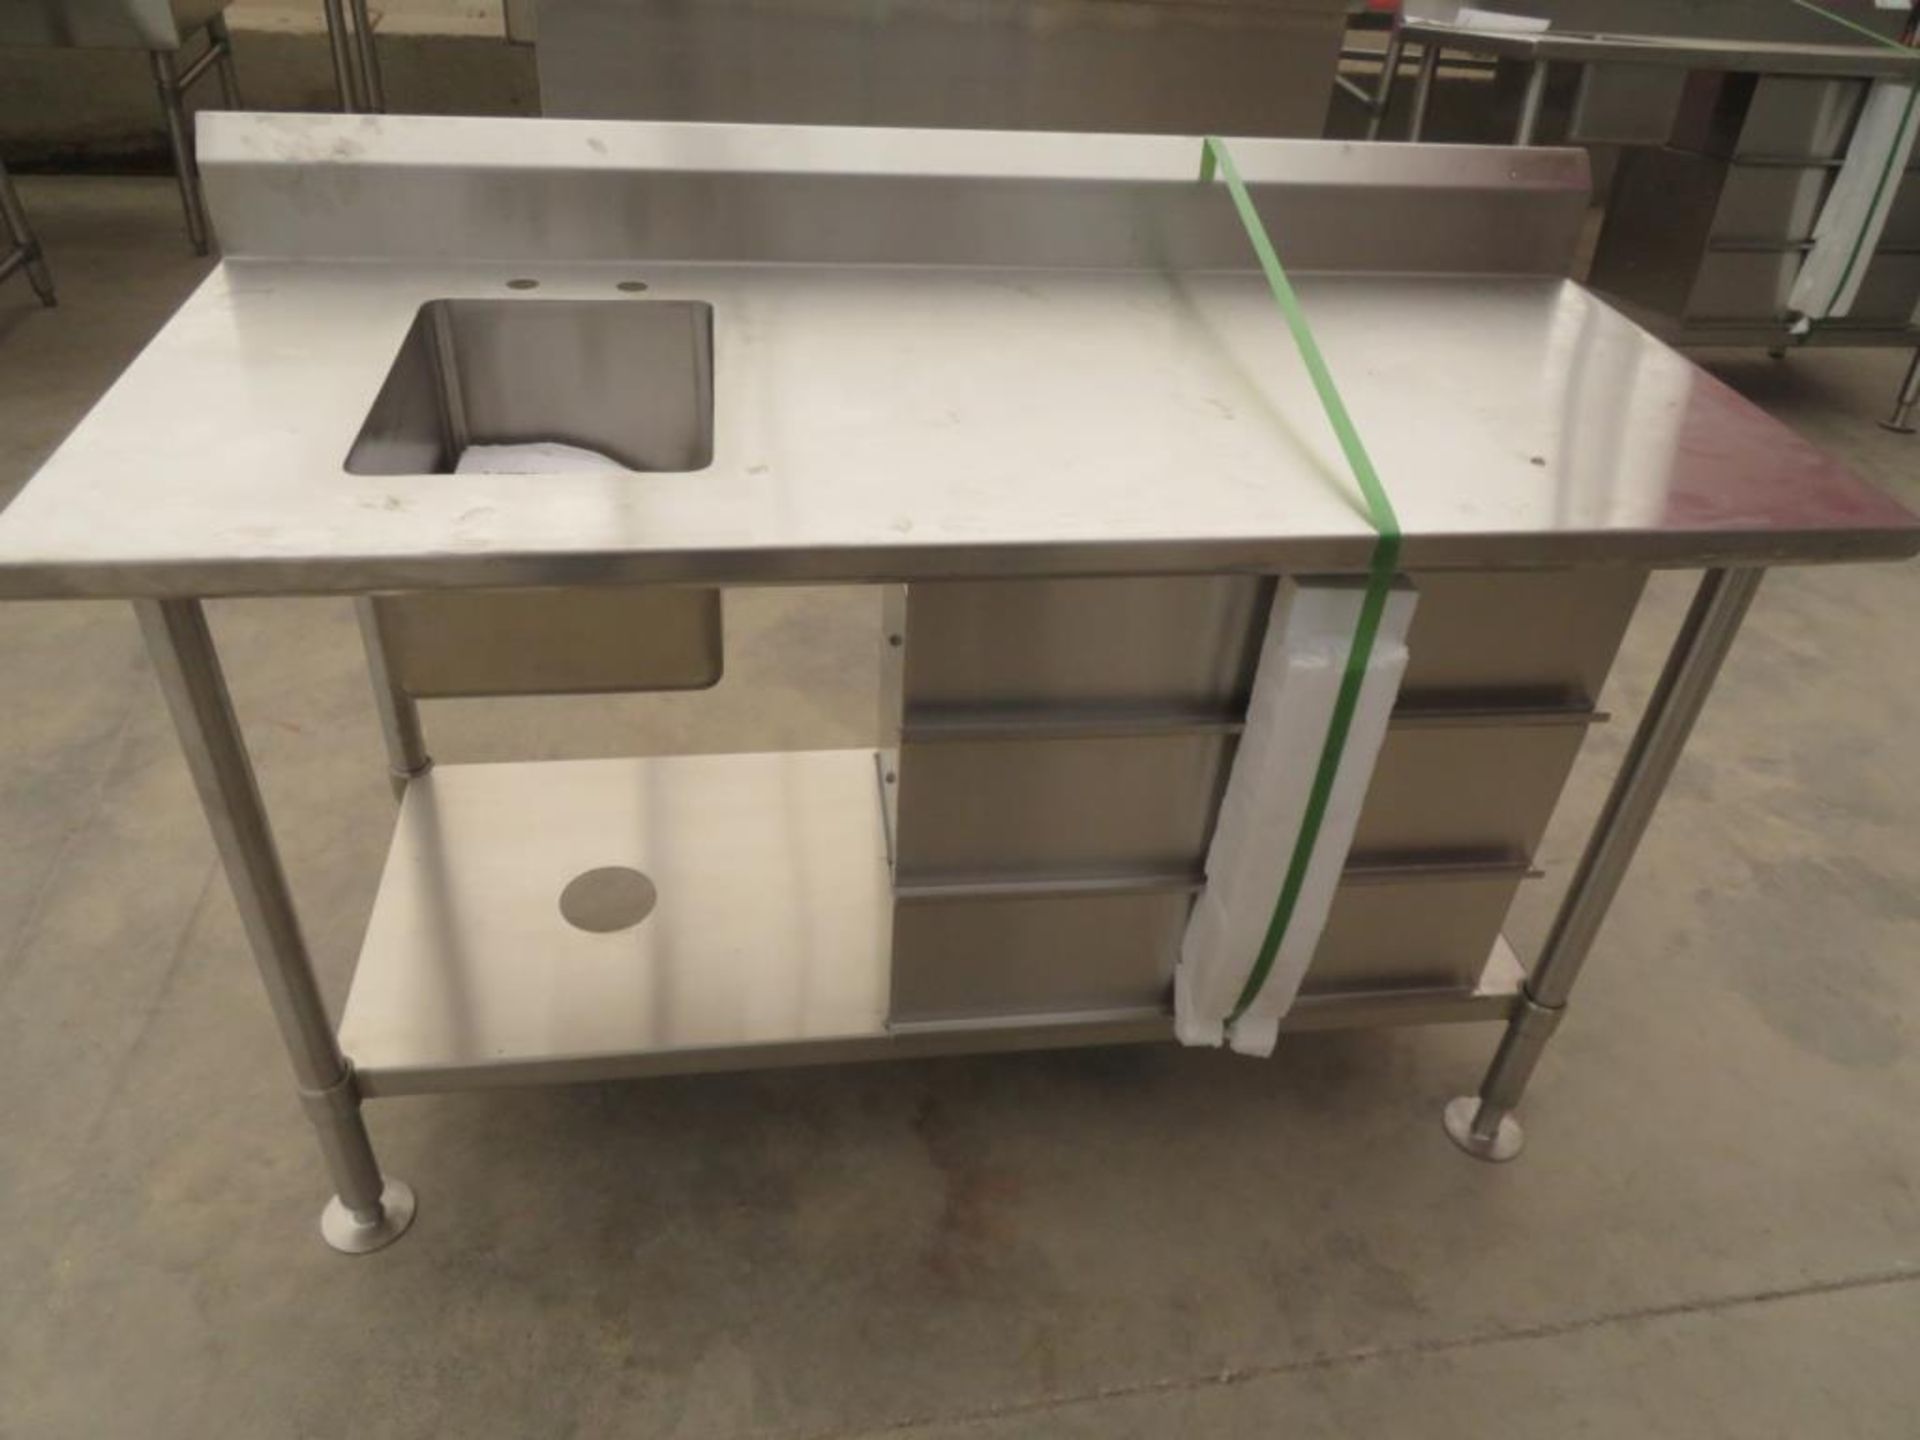 1 compartment vegetable wash station, 1-10"x14" bowl with 8" drainboard left and 36" drainboard